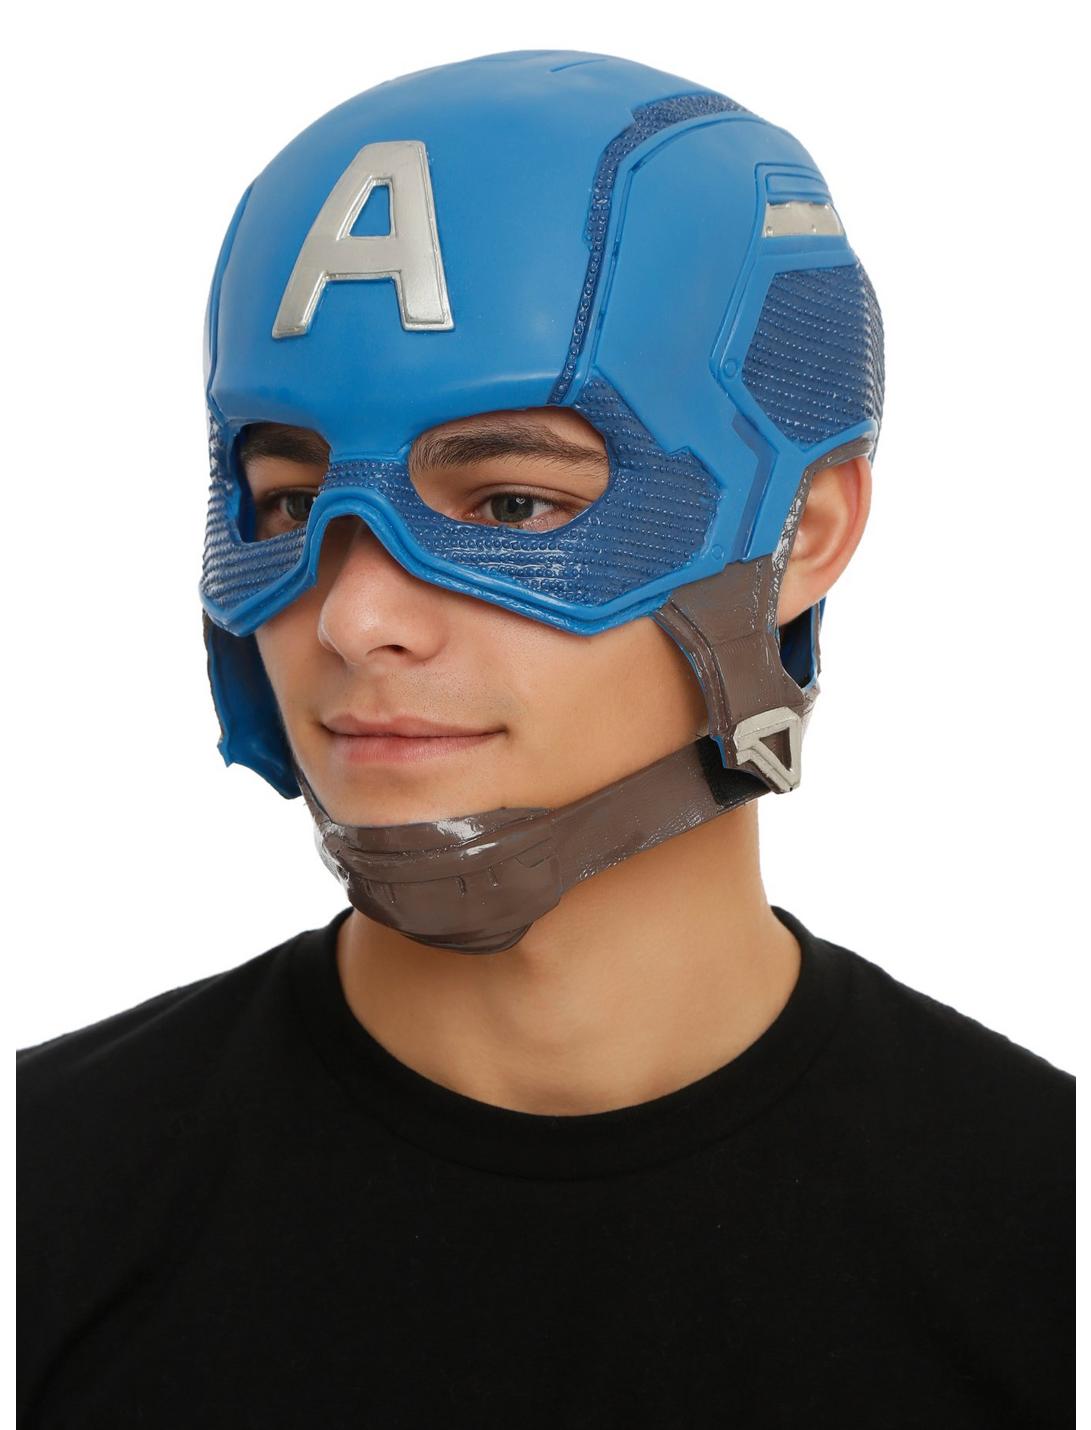 Marvel The Avengers: Age Of Ultron Captain America Mask, , hi-res